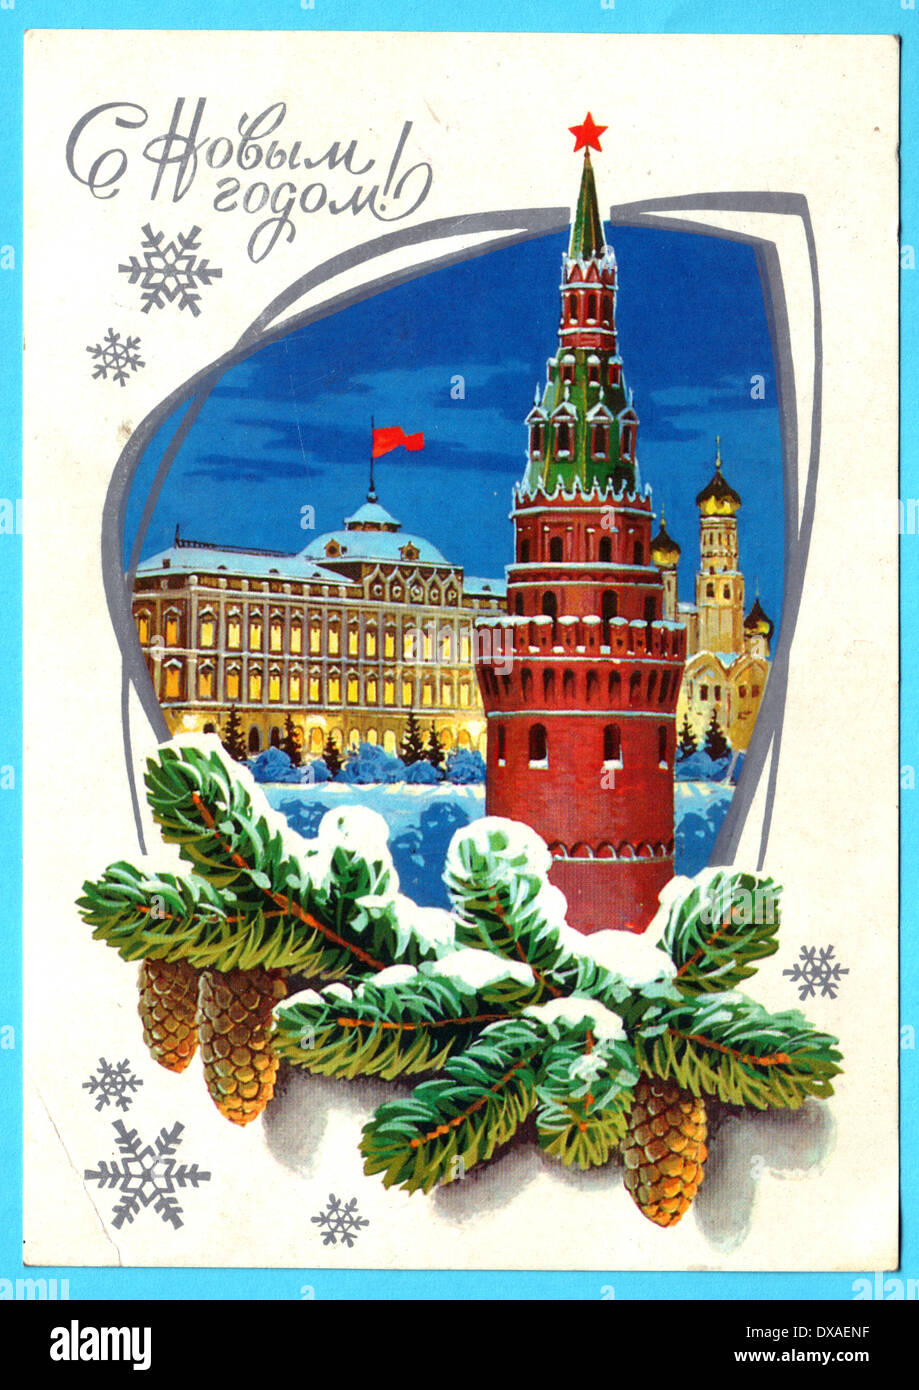 USSR - CIRCA 1979: Postcard printed in the USSR shows draw by Kyznecov - Spruce branch against Spassky Tower of the Moscow Kreml Stock Photo